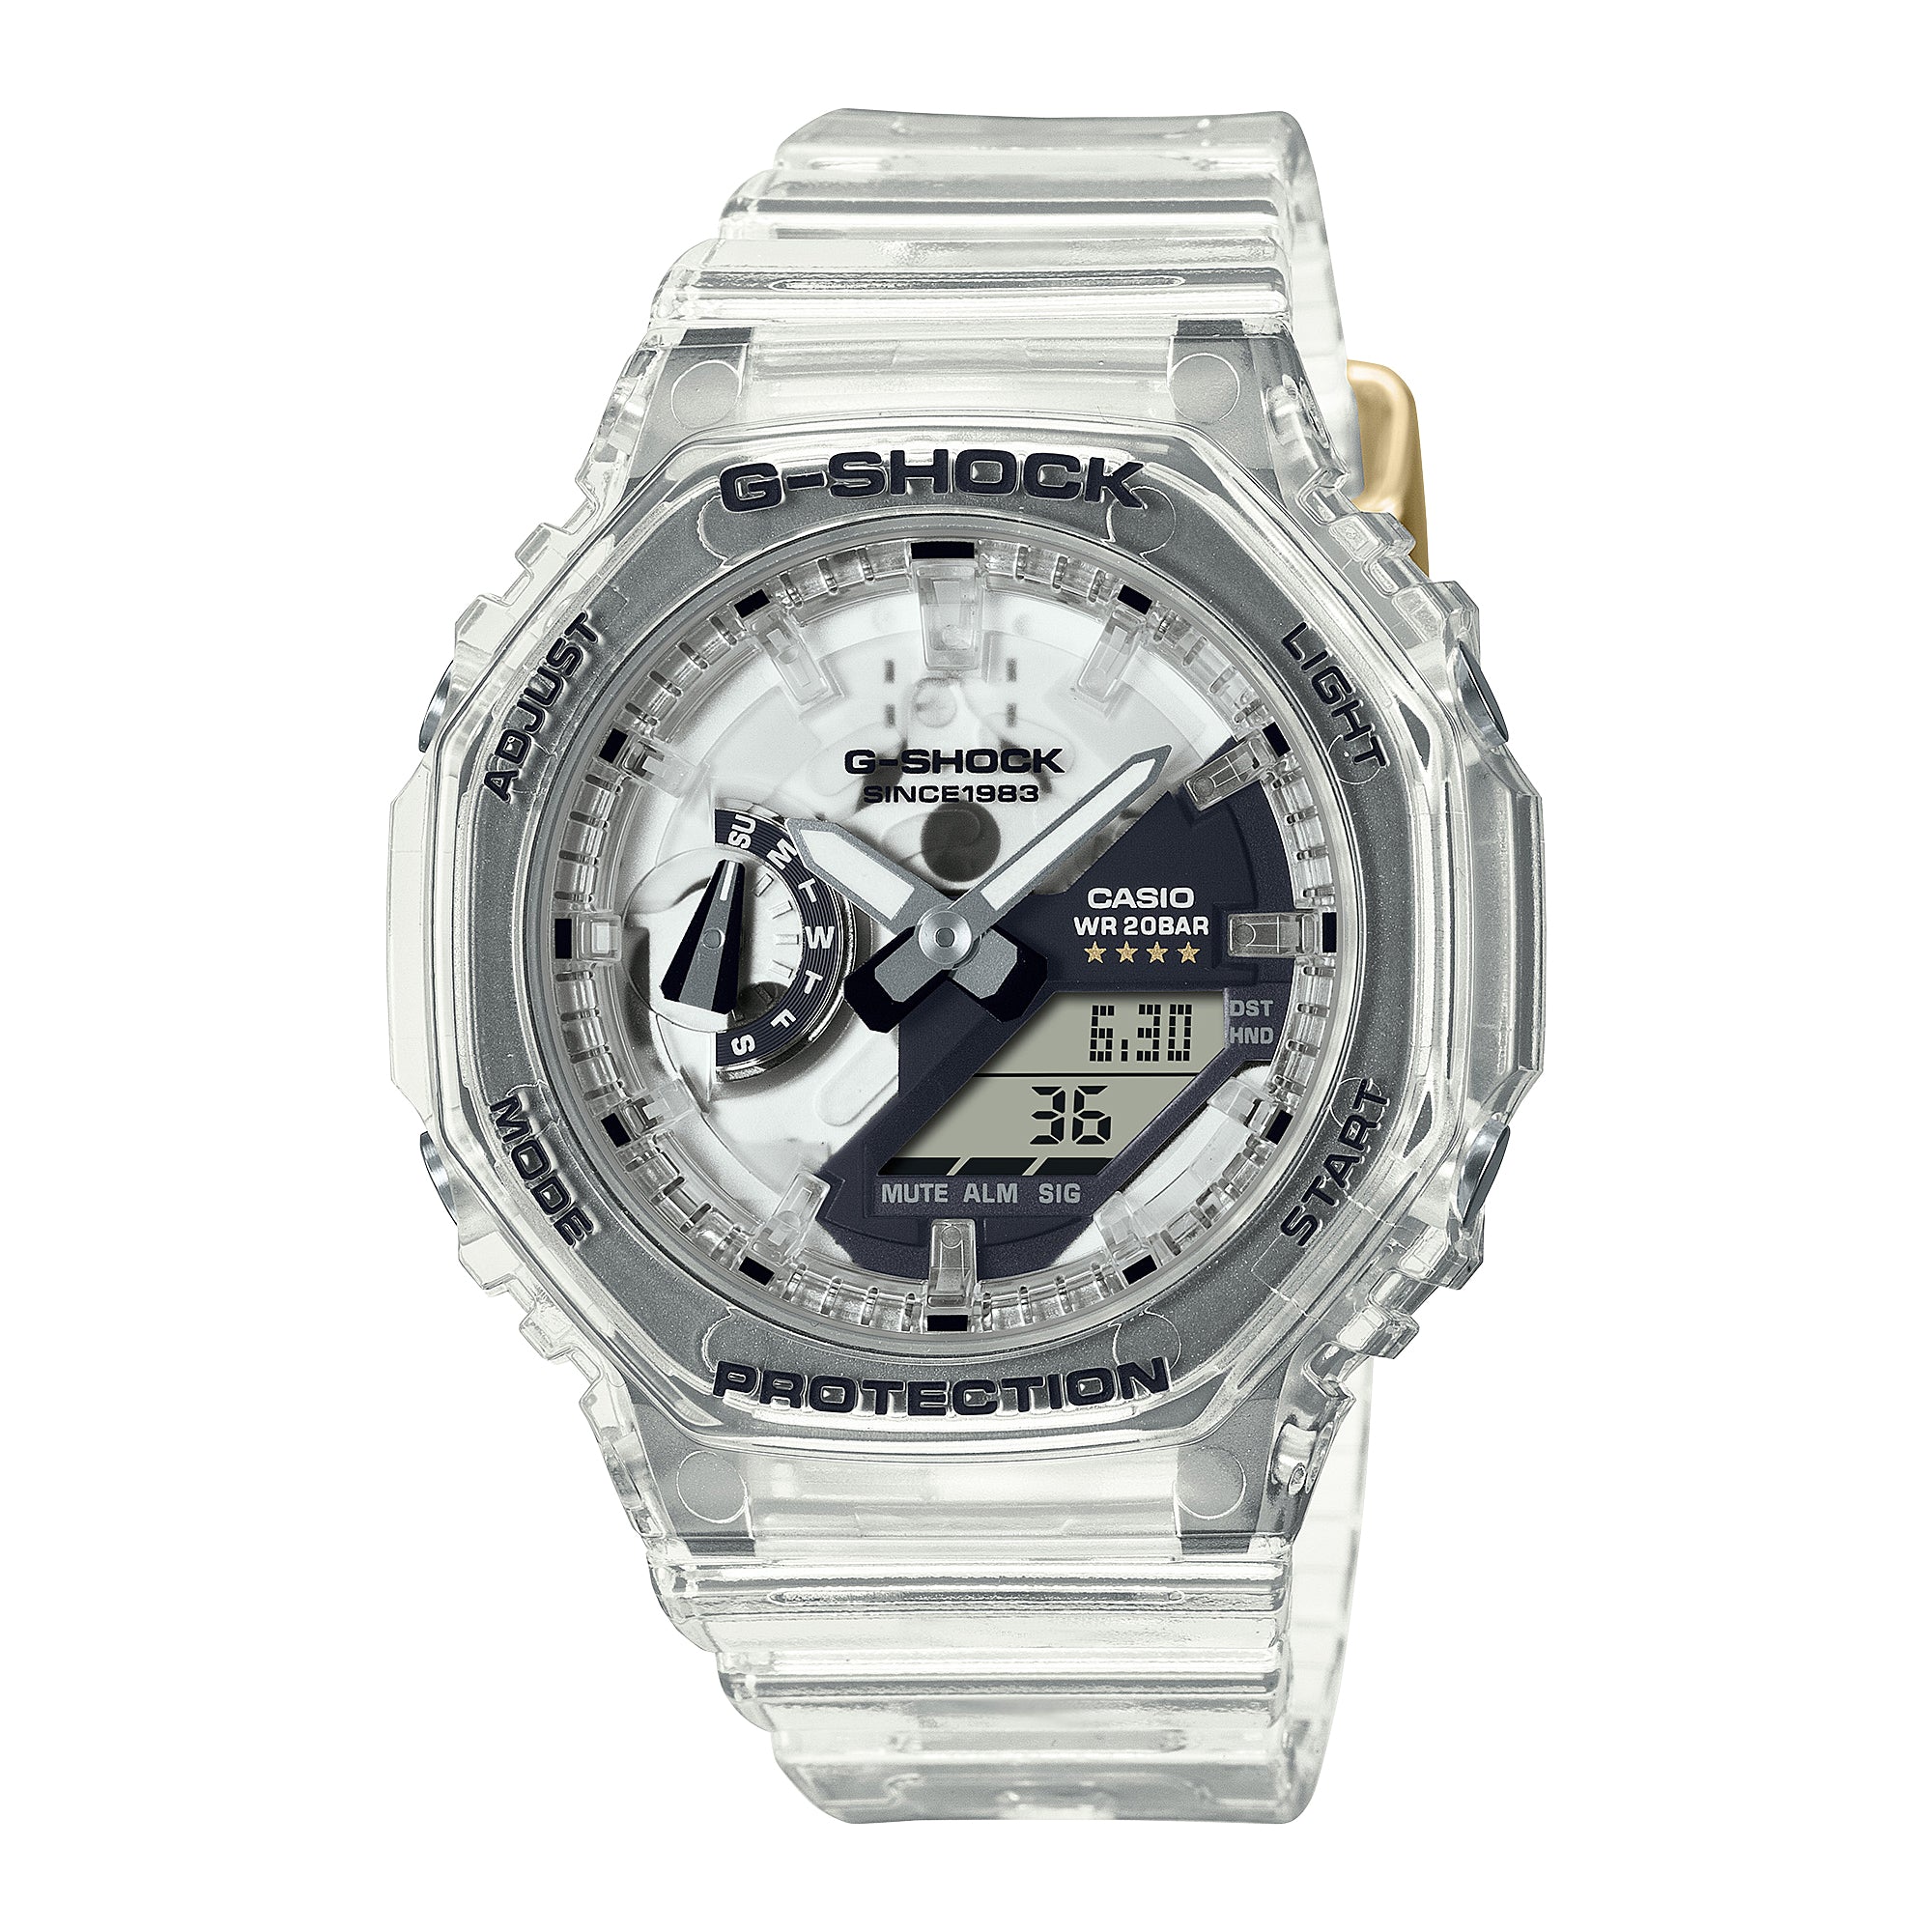 Casio G-Shock for Ladies' 40th Anniversary CLEAR REMIX Limited Edition GMA-S2100 Lineup Watch GMAS2140RX-7A GMA-S2140RX-7A